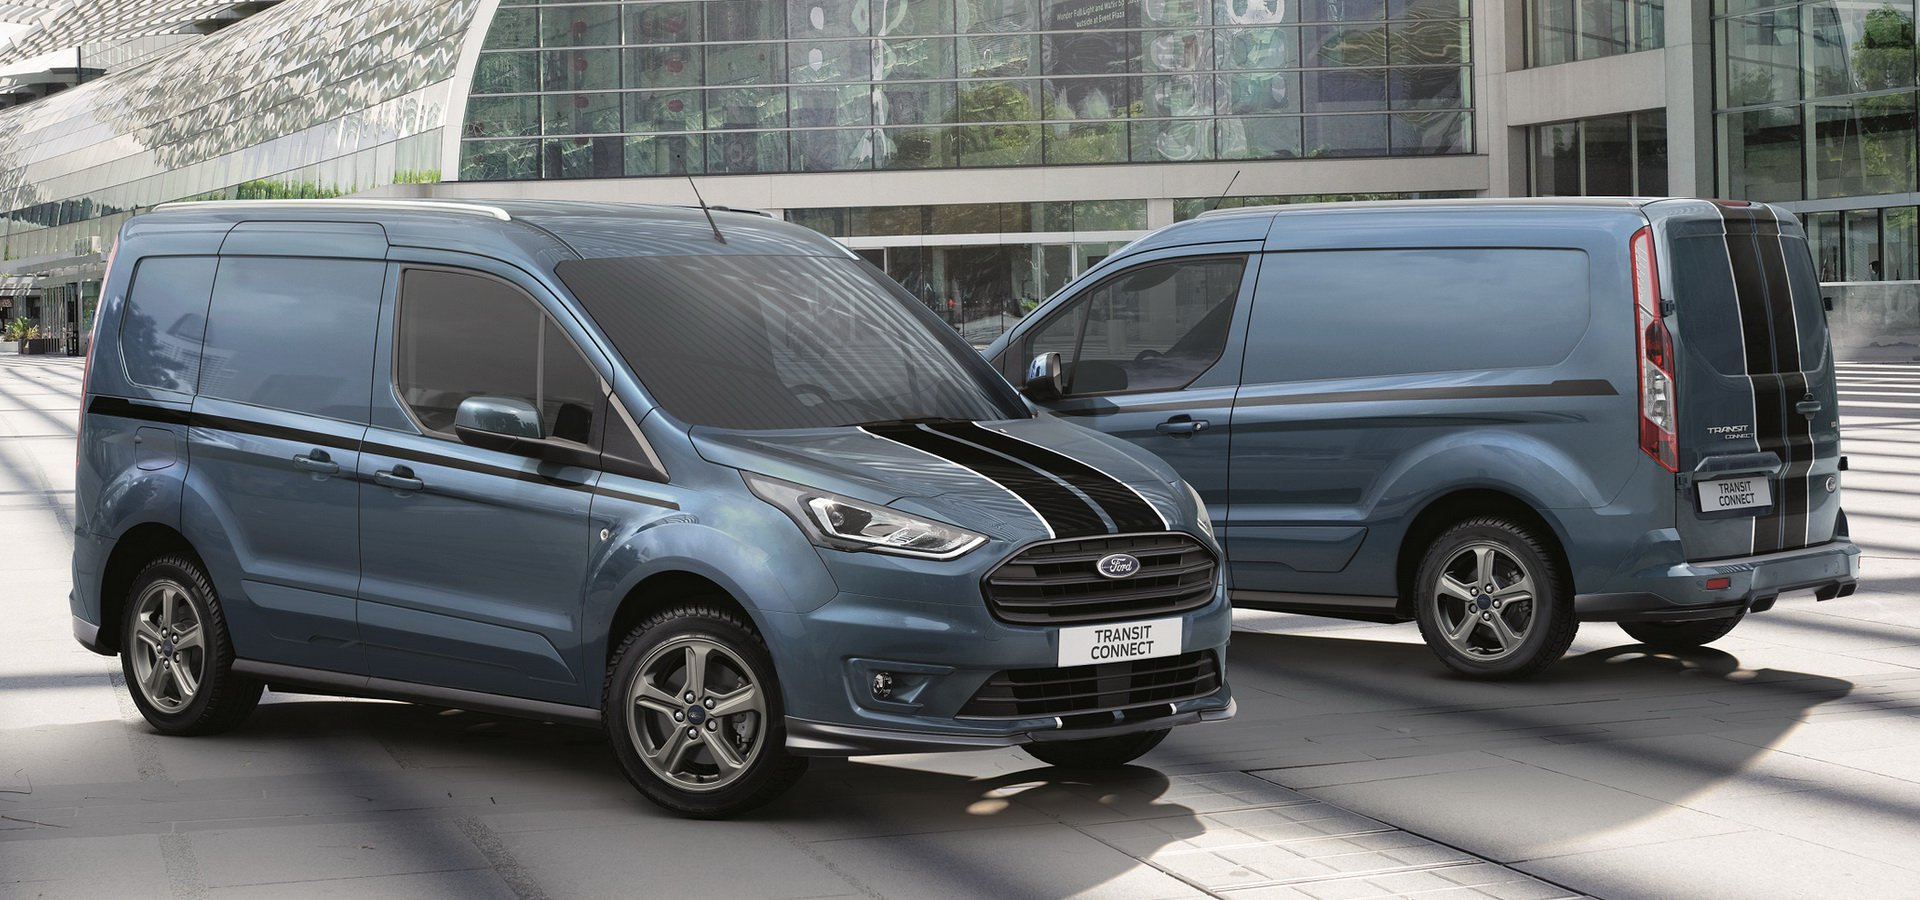 d67d9197-ford-all-new-transit-connect-4.jpg